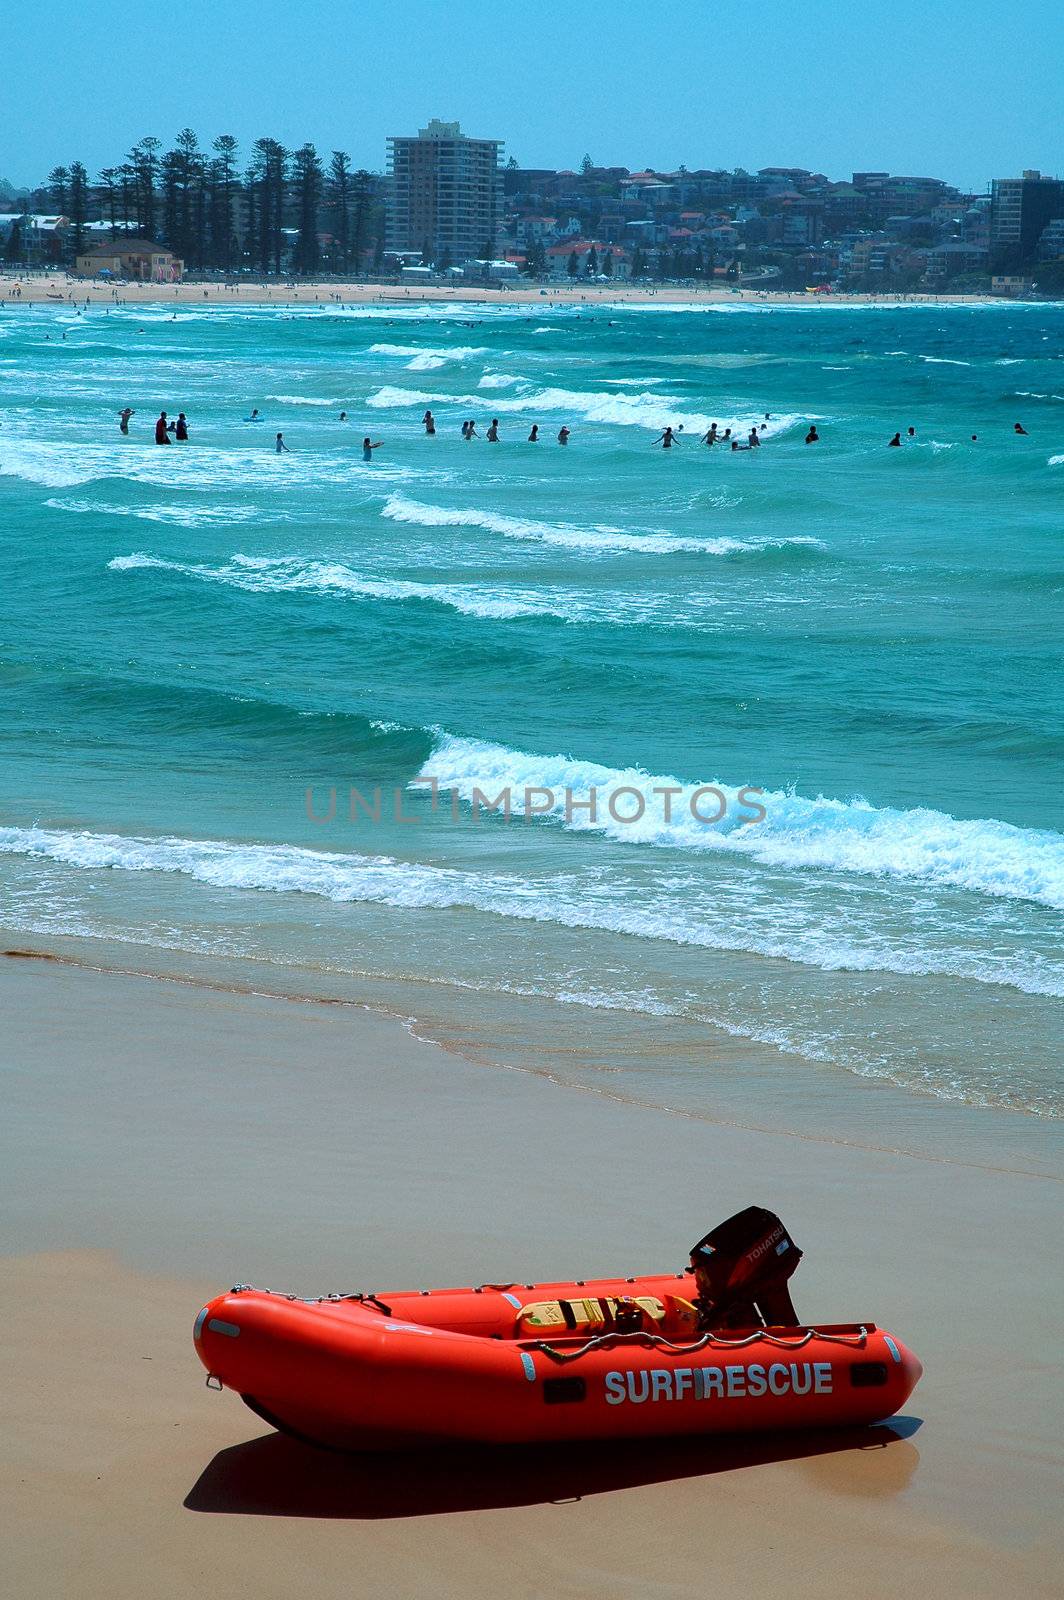 red boat with white sign: surf rescue, blue ocean in background